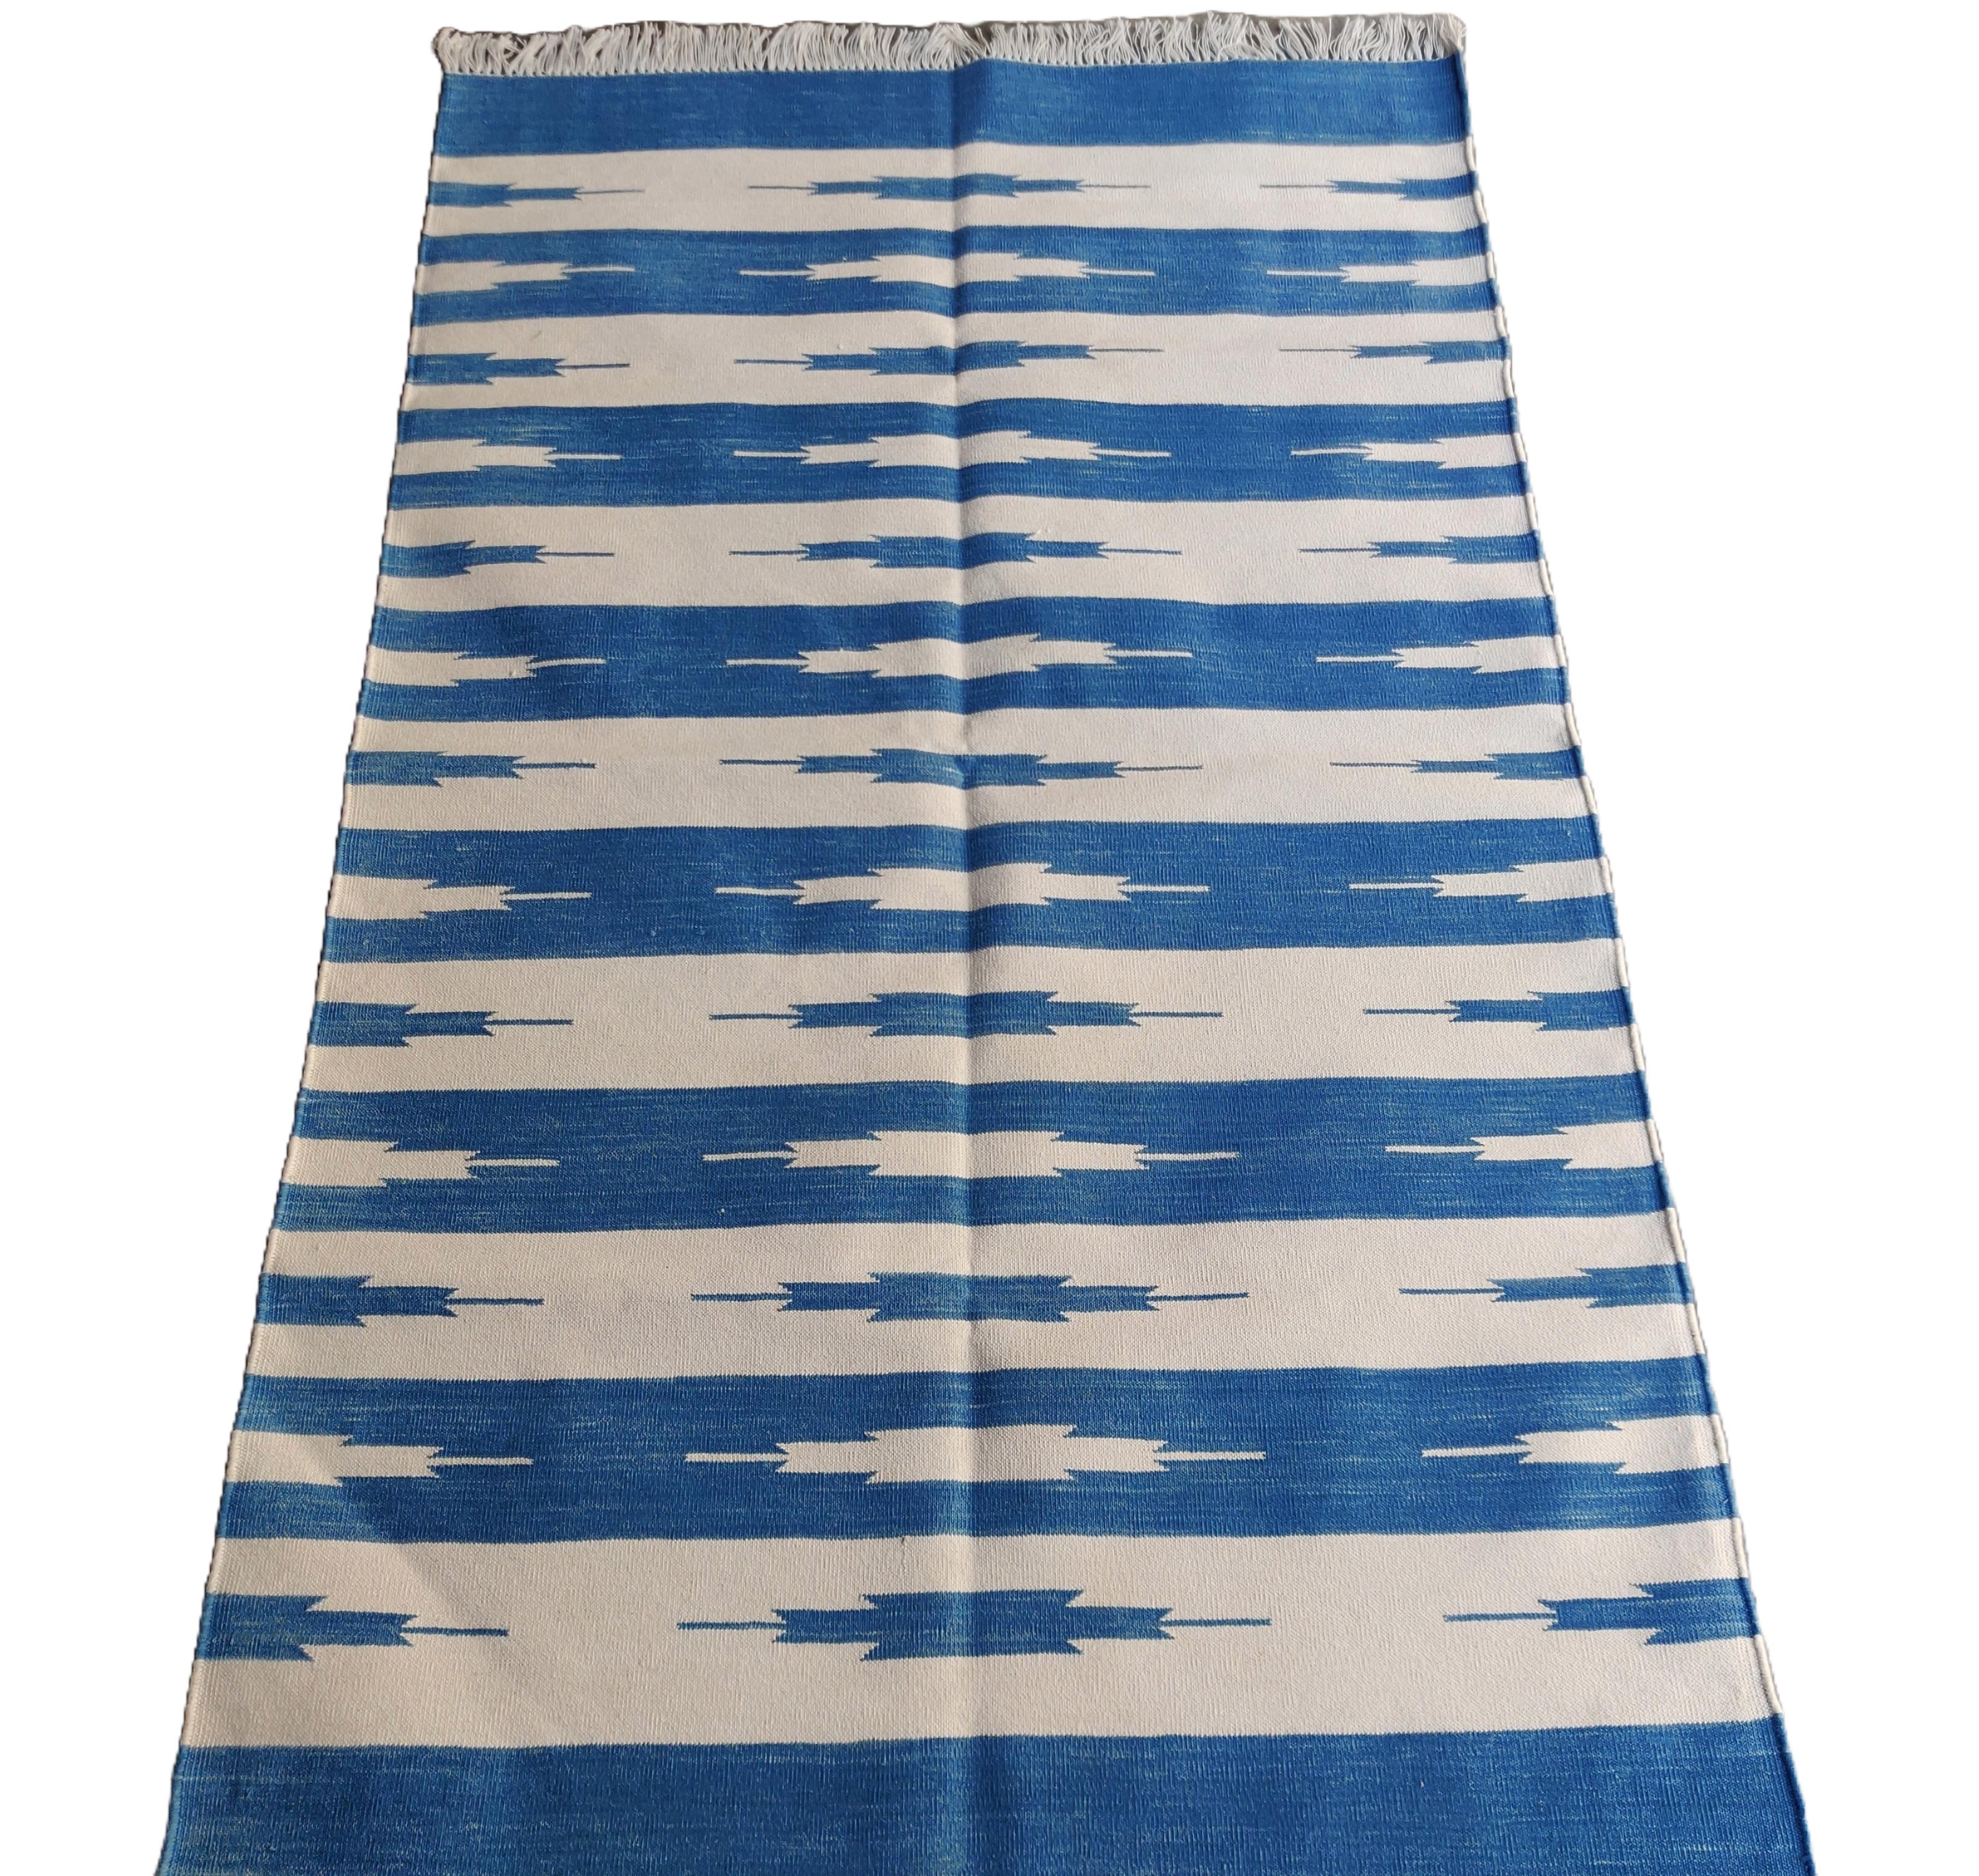 Contemporary Handmade Cotton Area Flat Weave Rug, 3x5 Blue And White Striped Indian Dhurrie For Sale